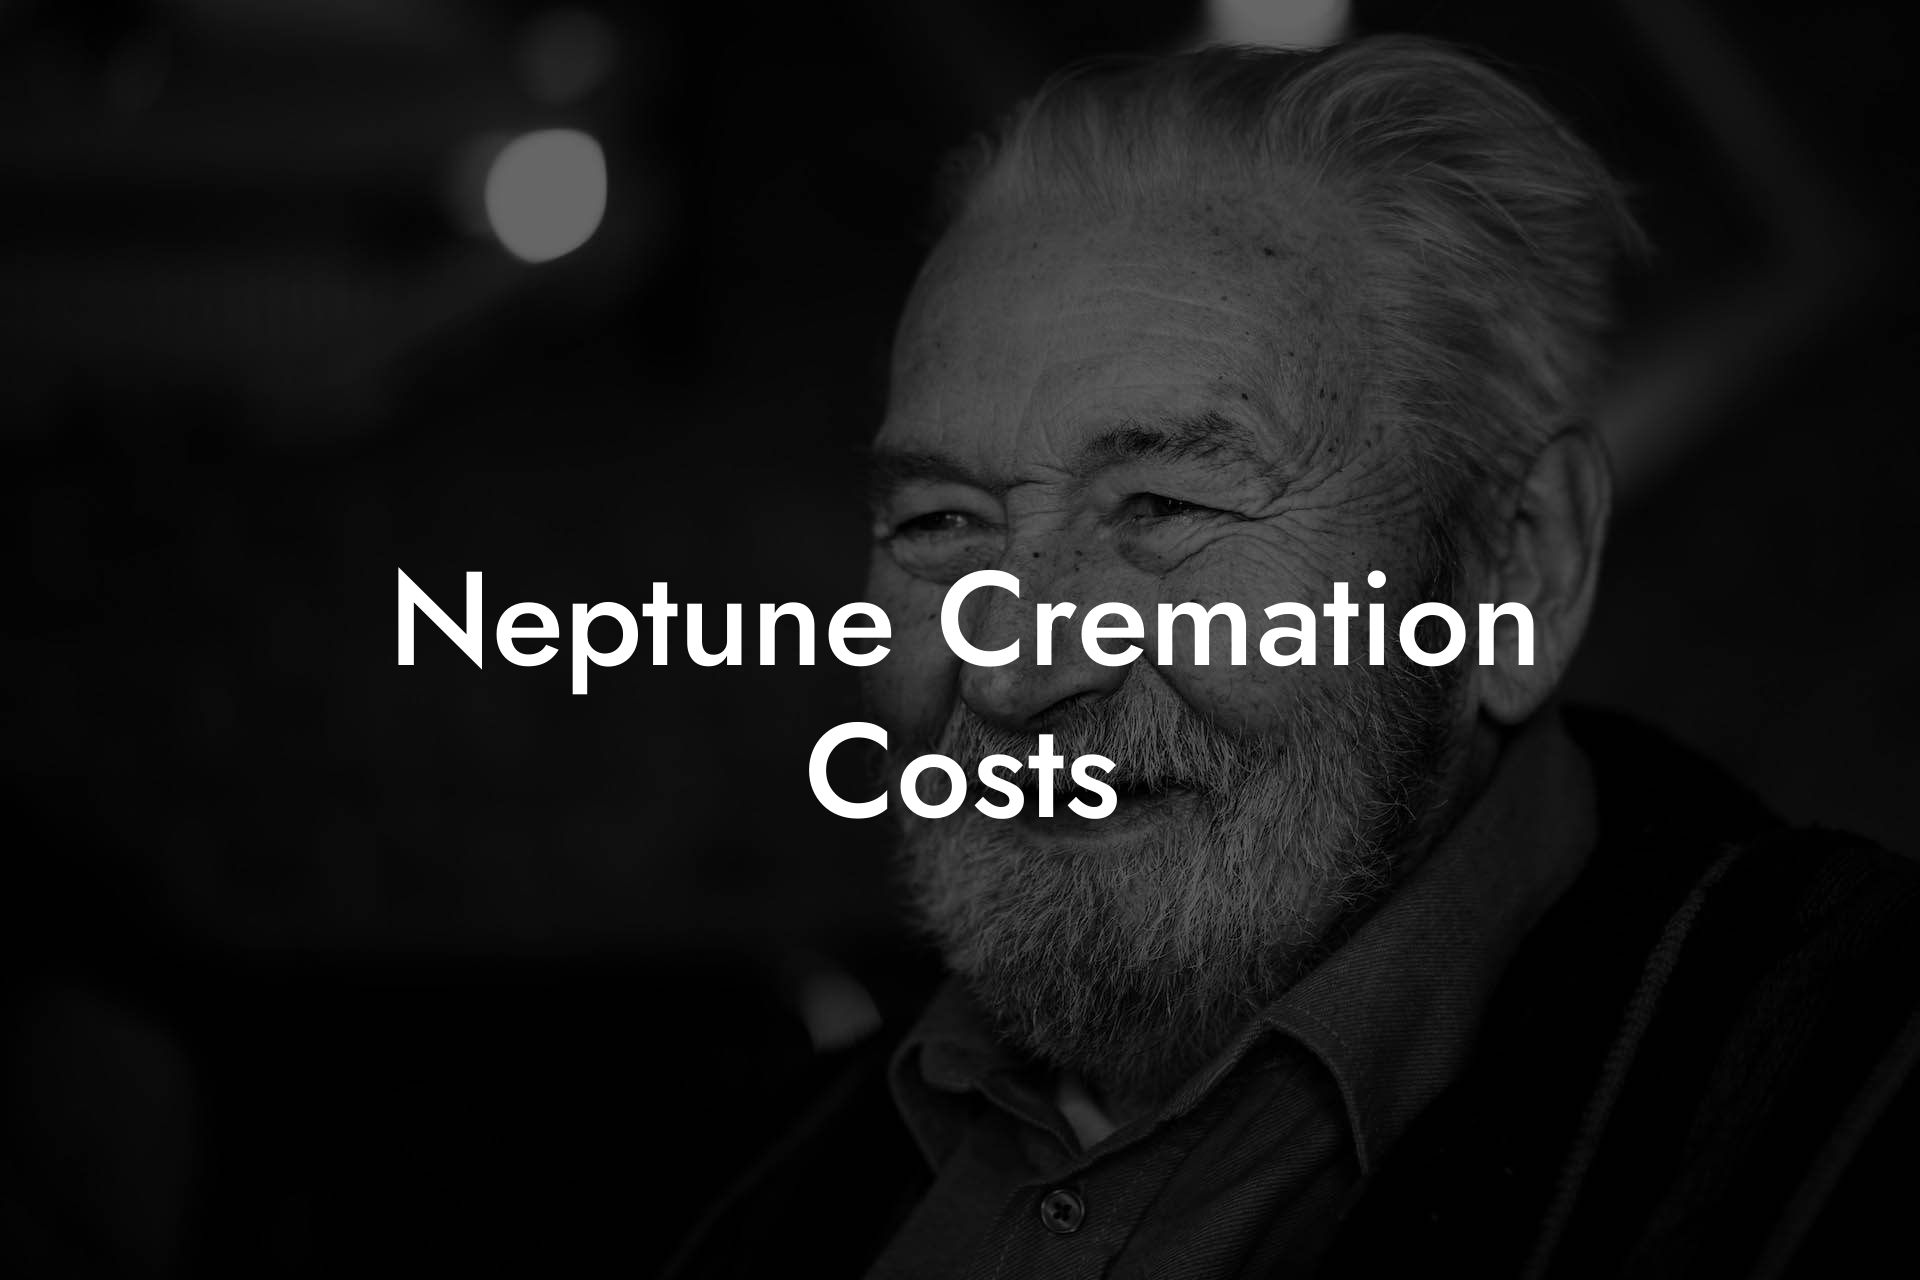 Neptune Cremation Costs